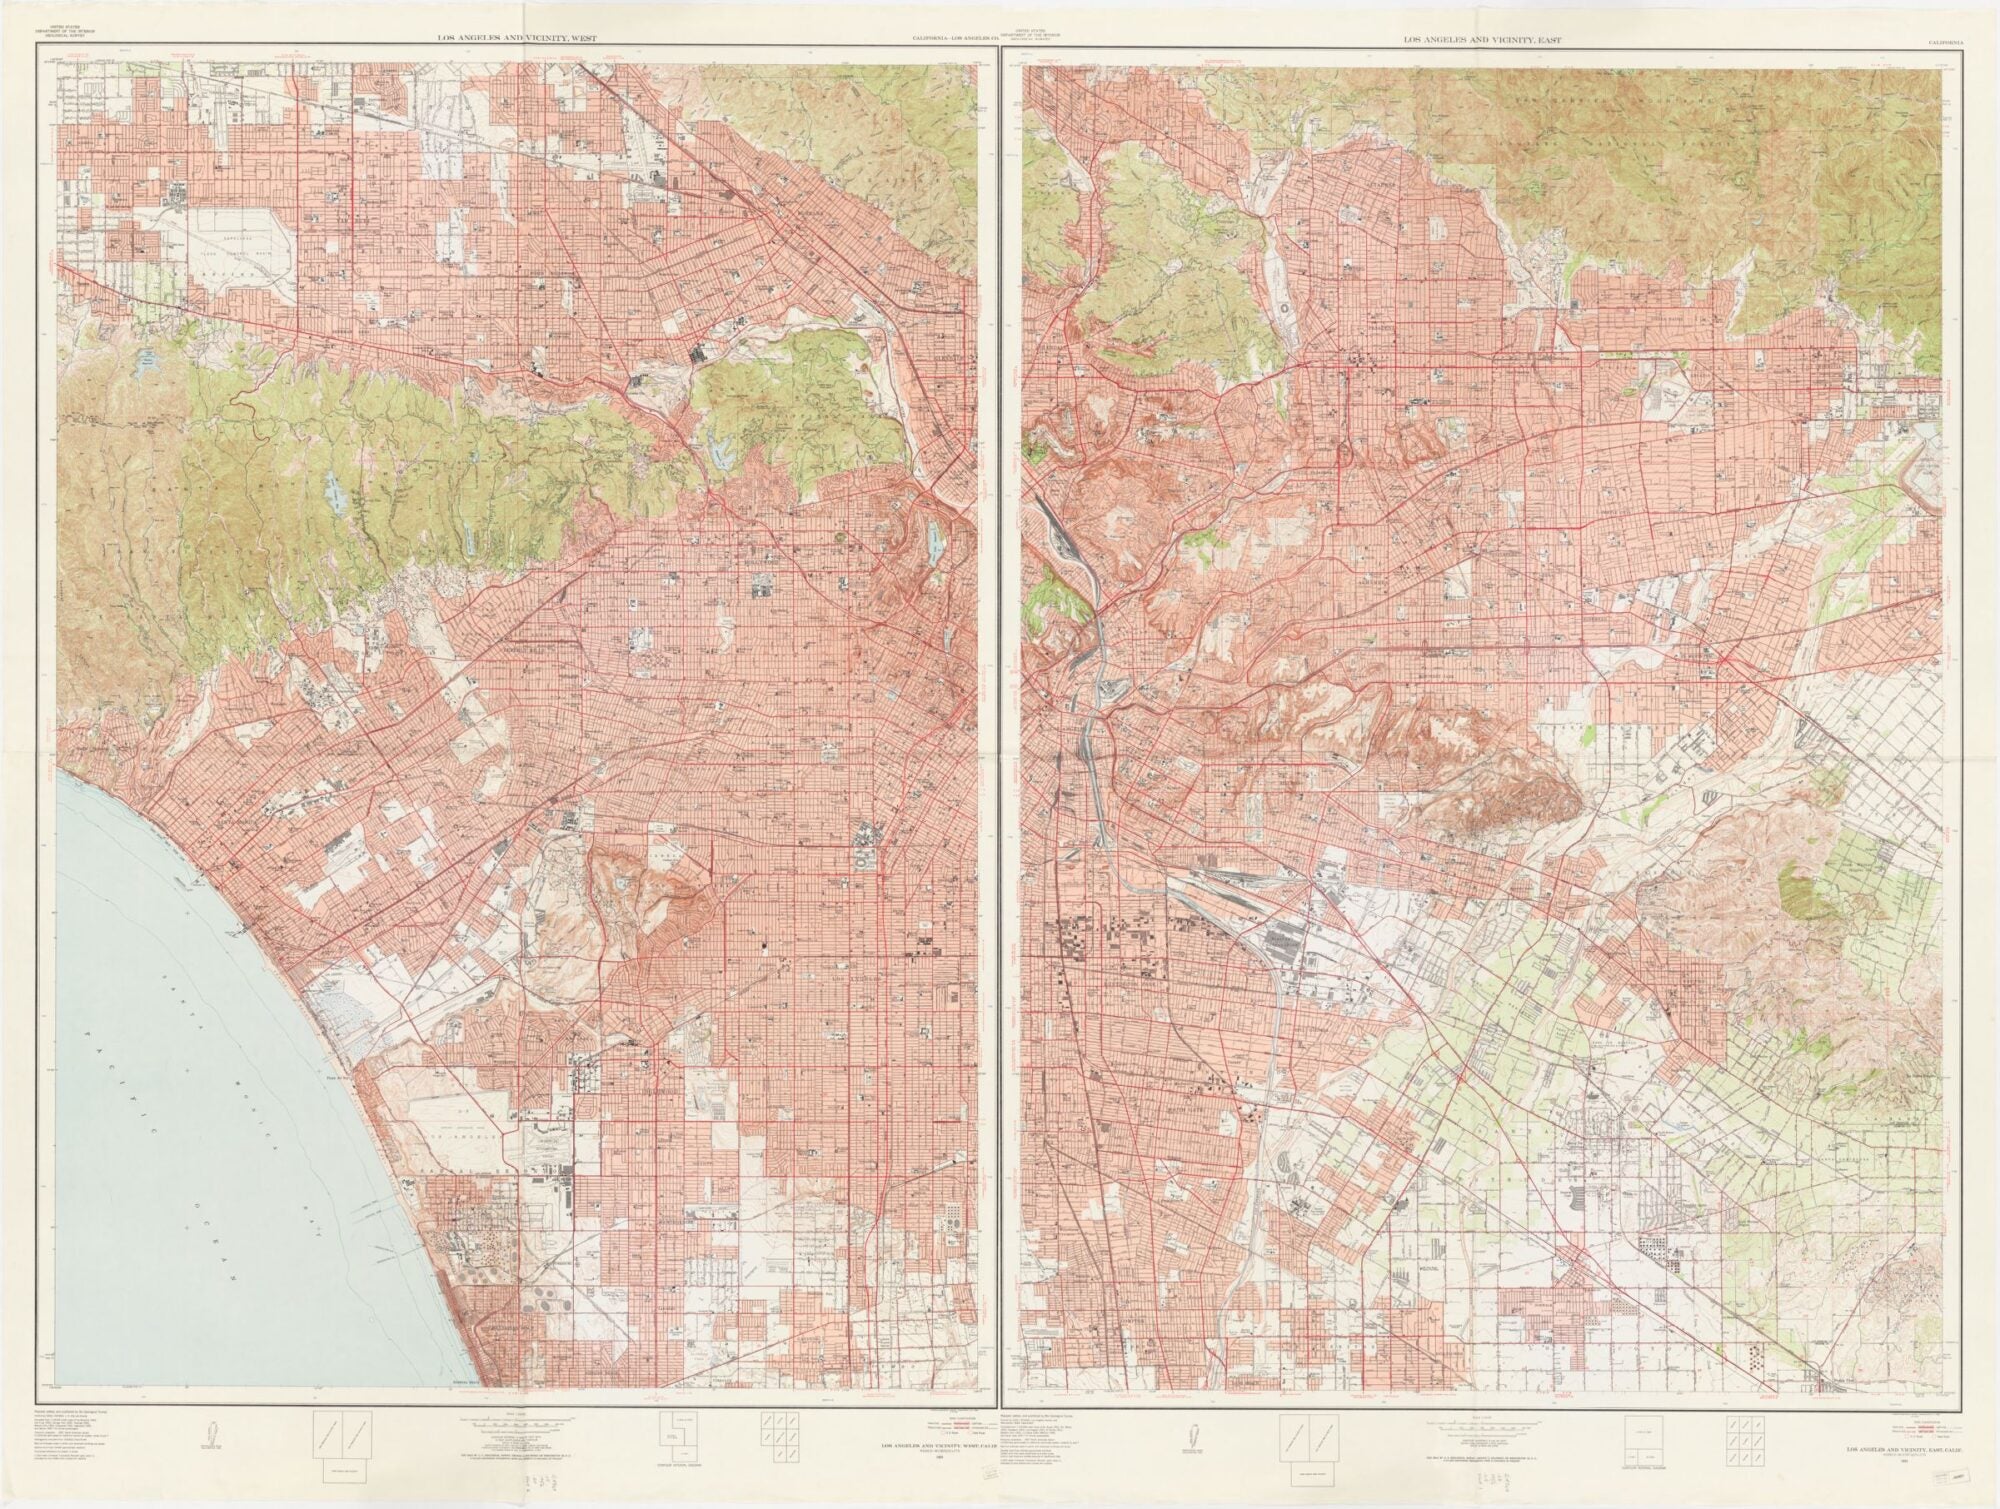 An old map of Los Angeles